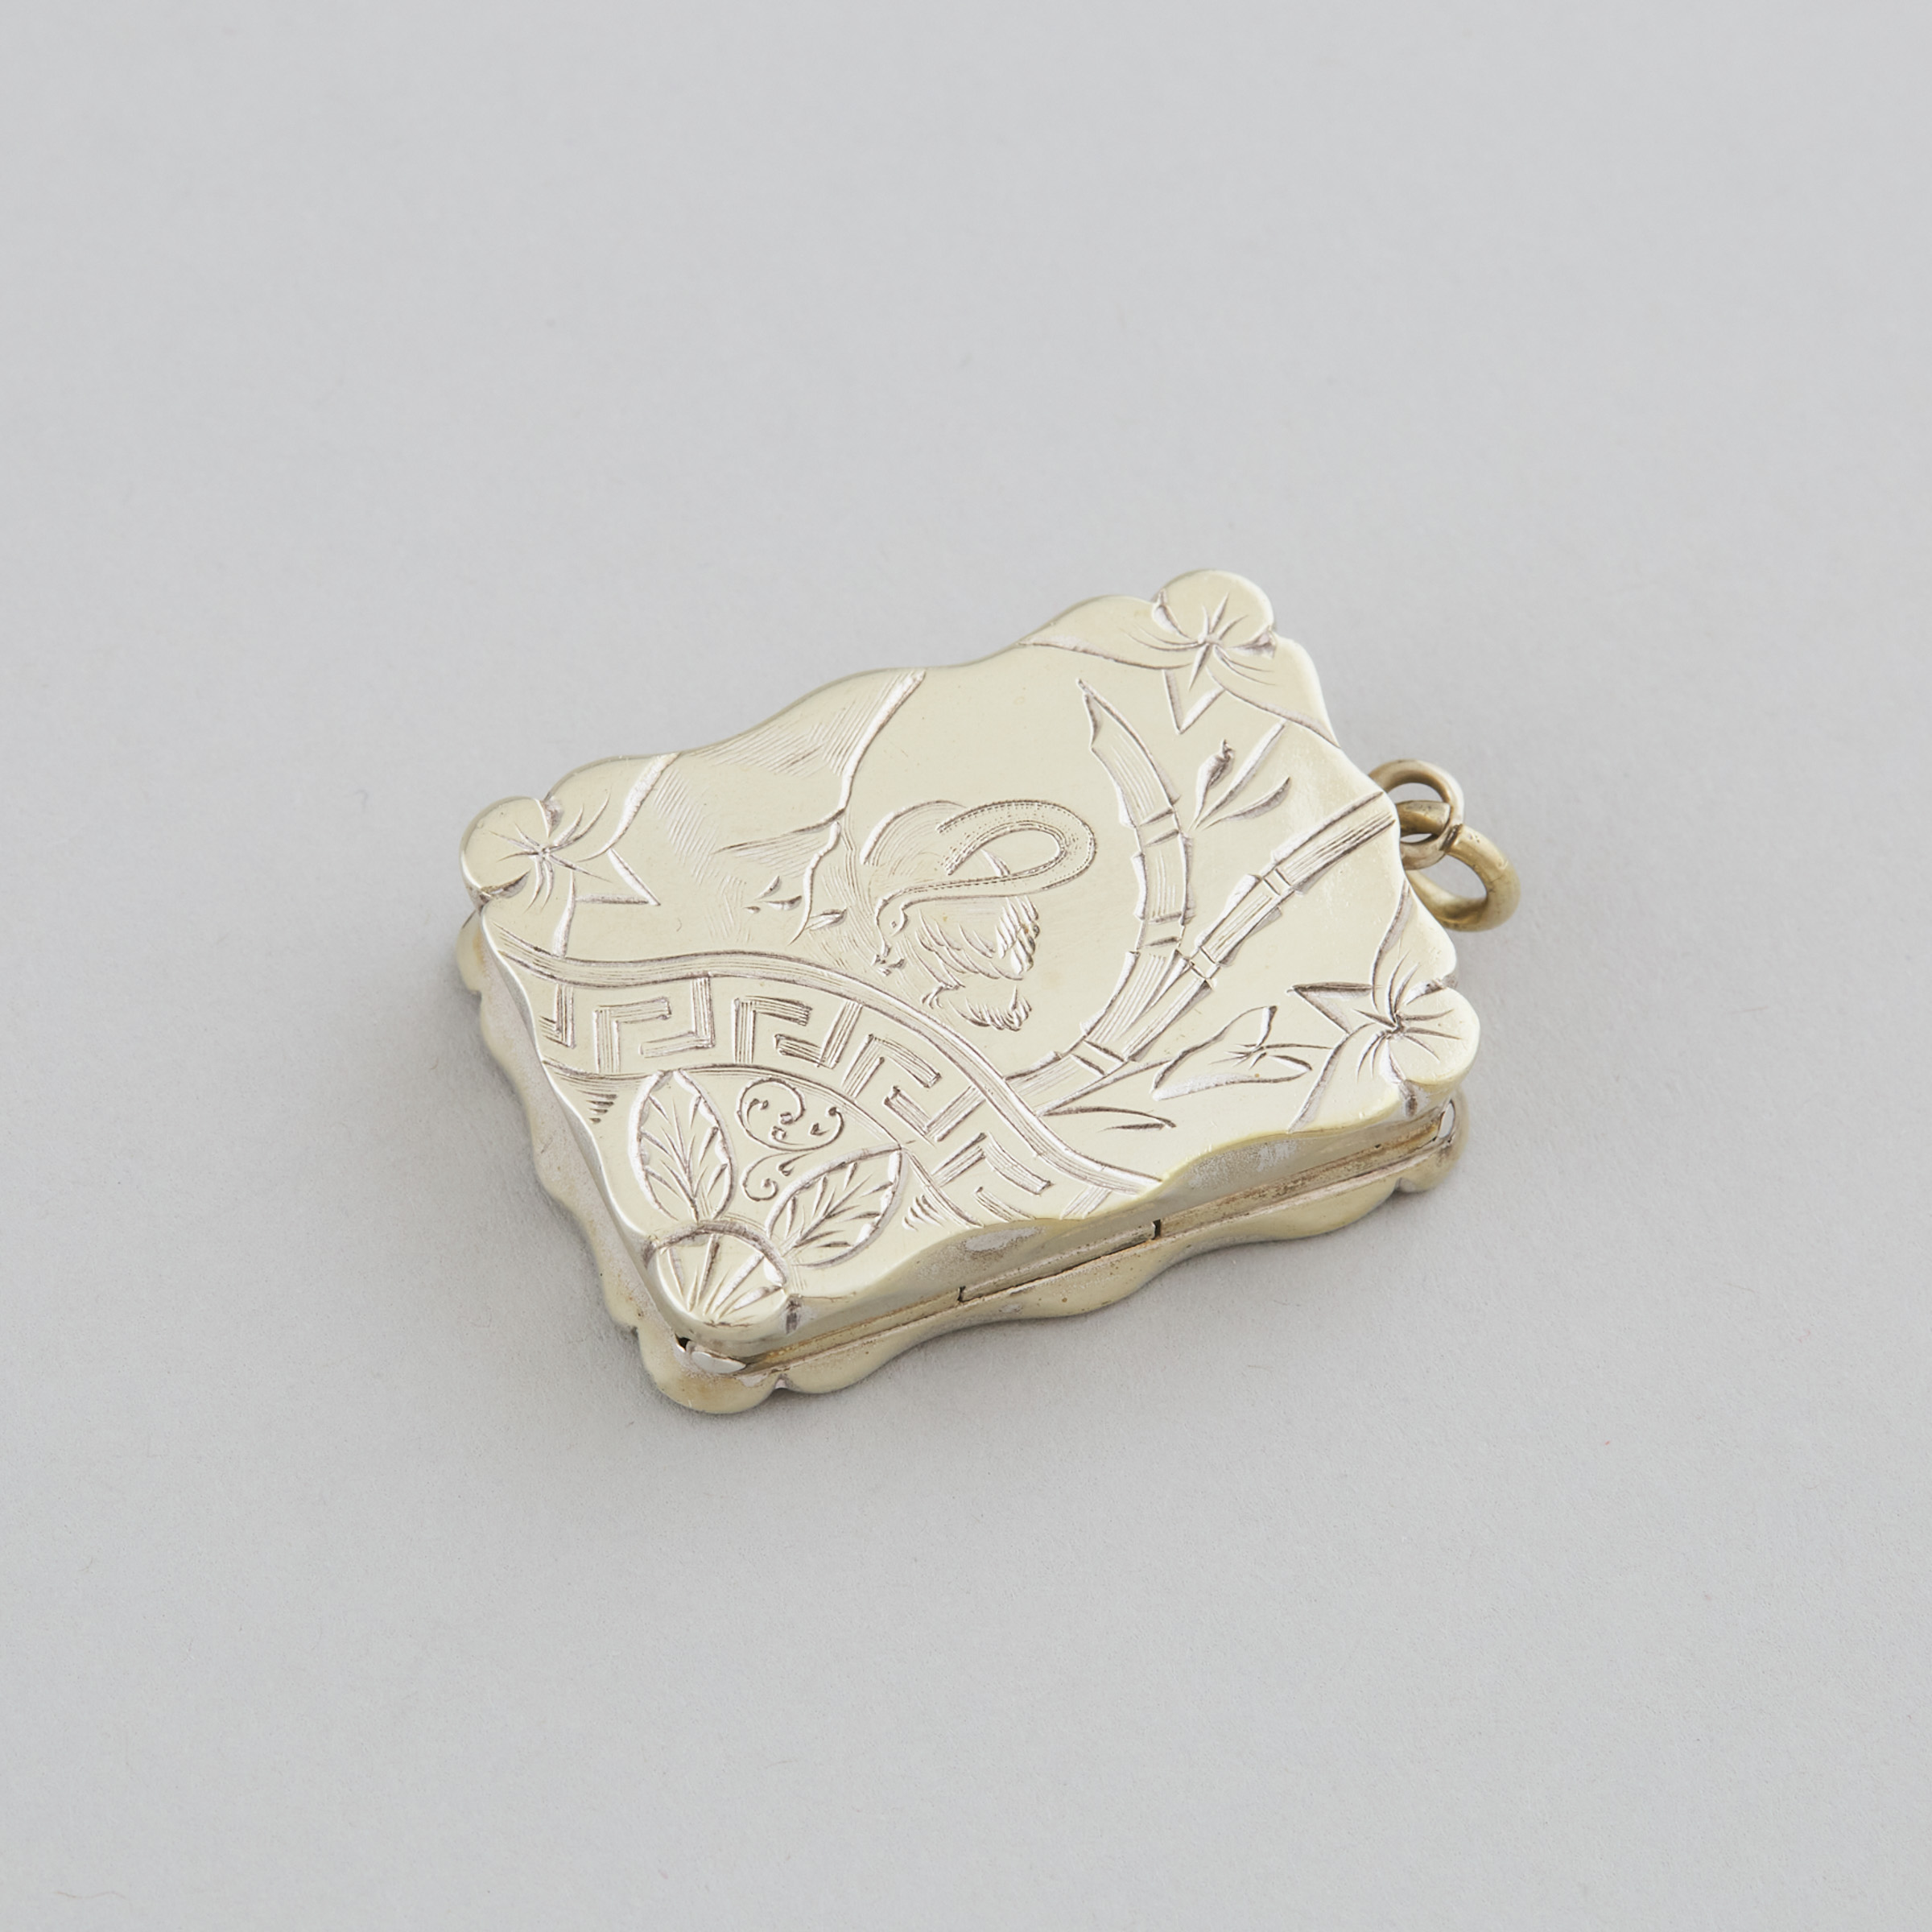 Engraved Silver-Gilt Shaped Rectangular Vinaigrette, possibly Chinese Export or Japanese, 1880s